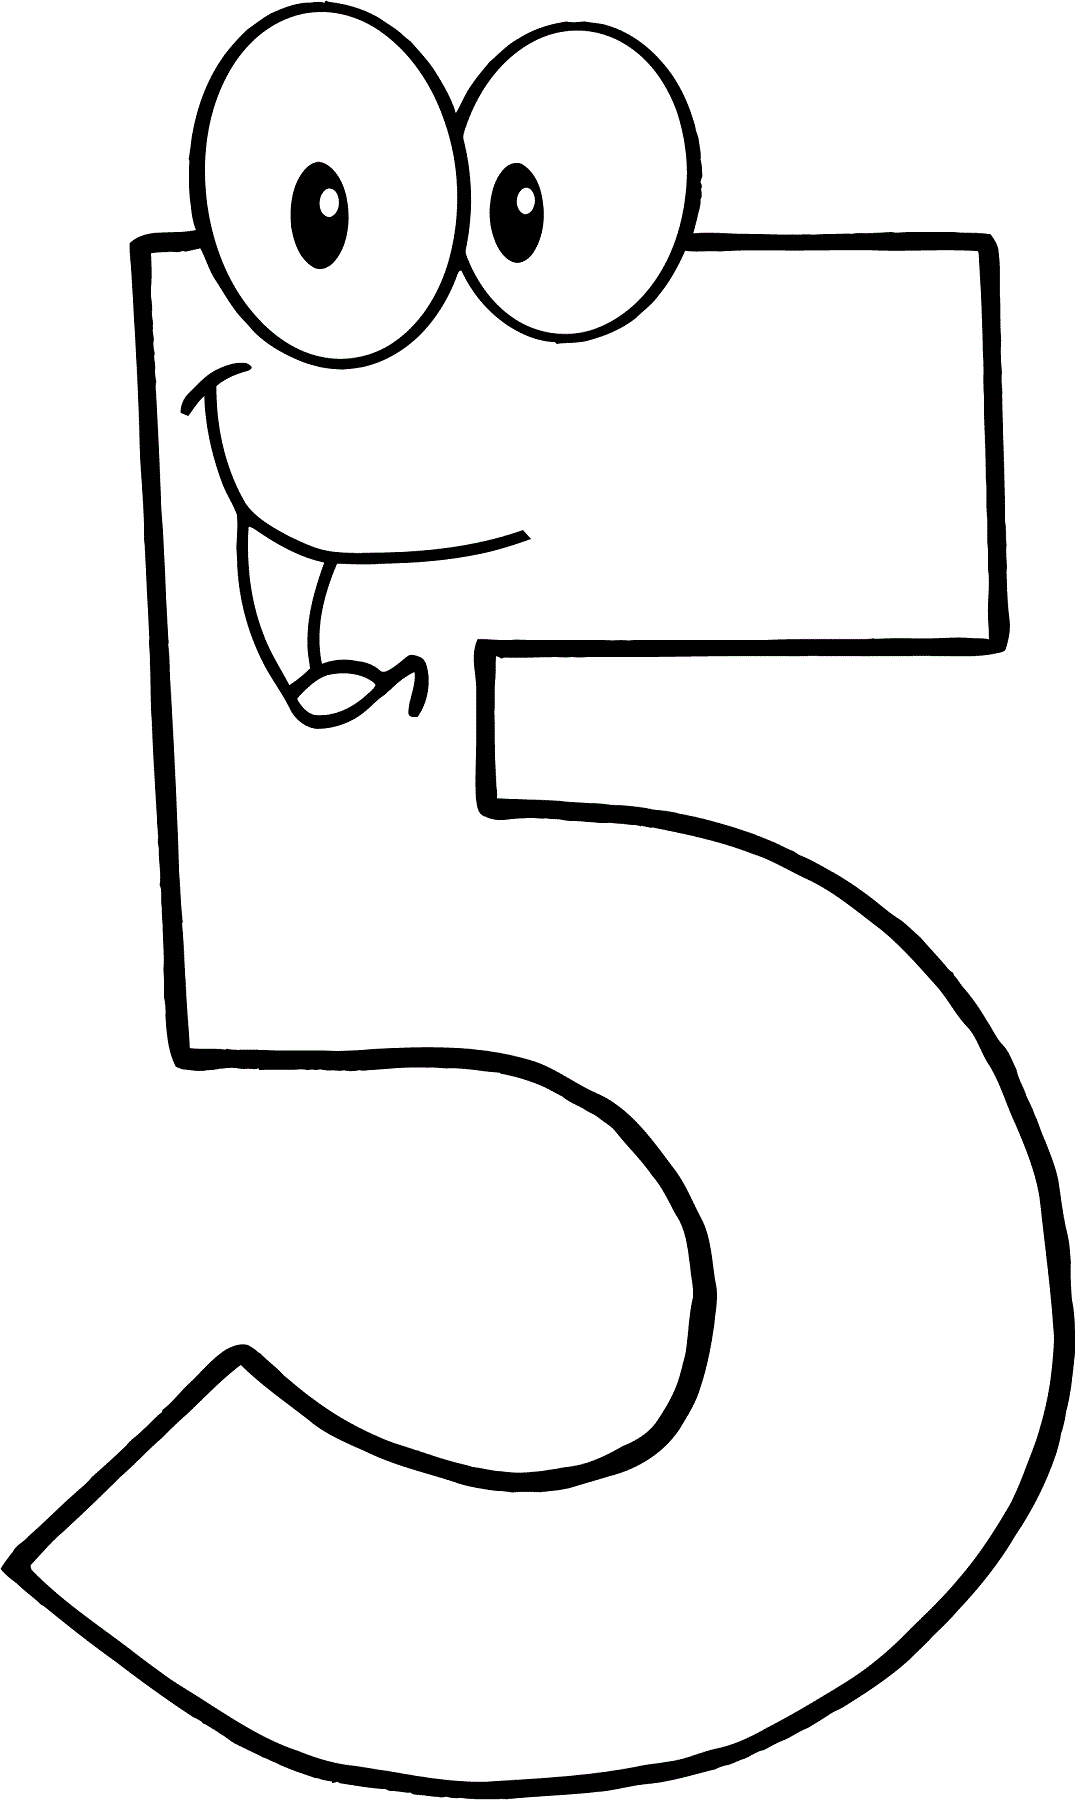 picture of the number 5 for kids